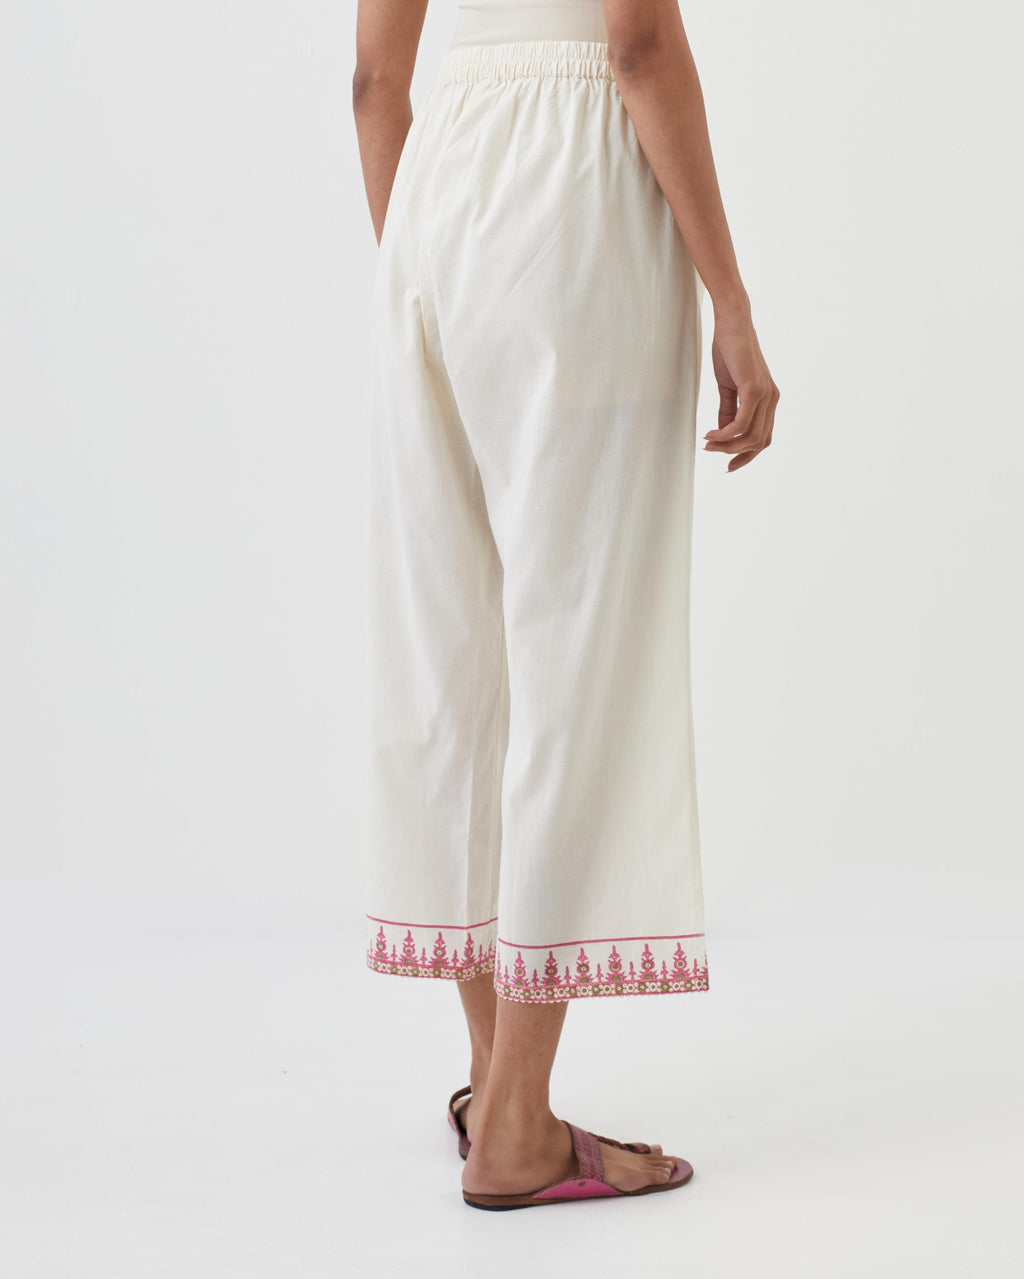 Off white cotton ankle length pants with hand block print detailing at bottom hem.